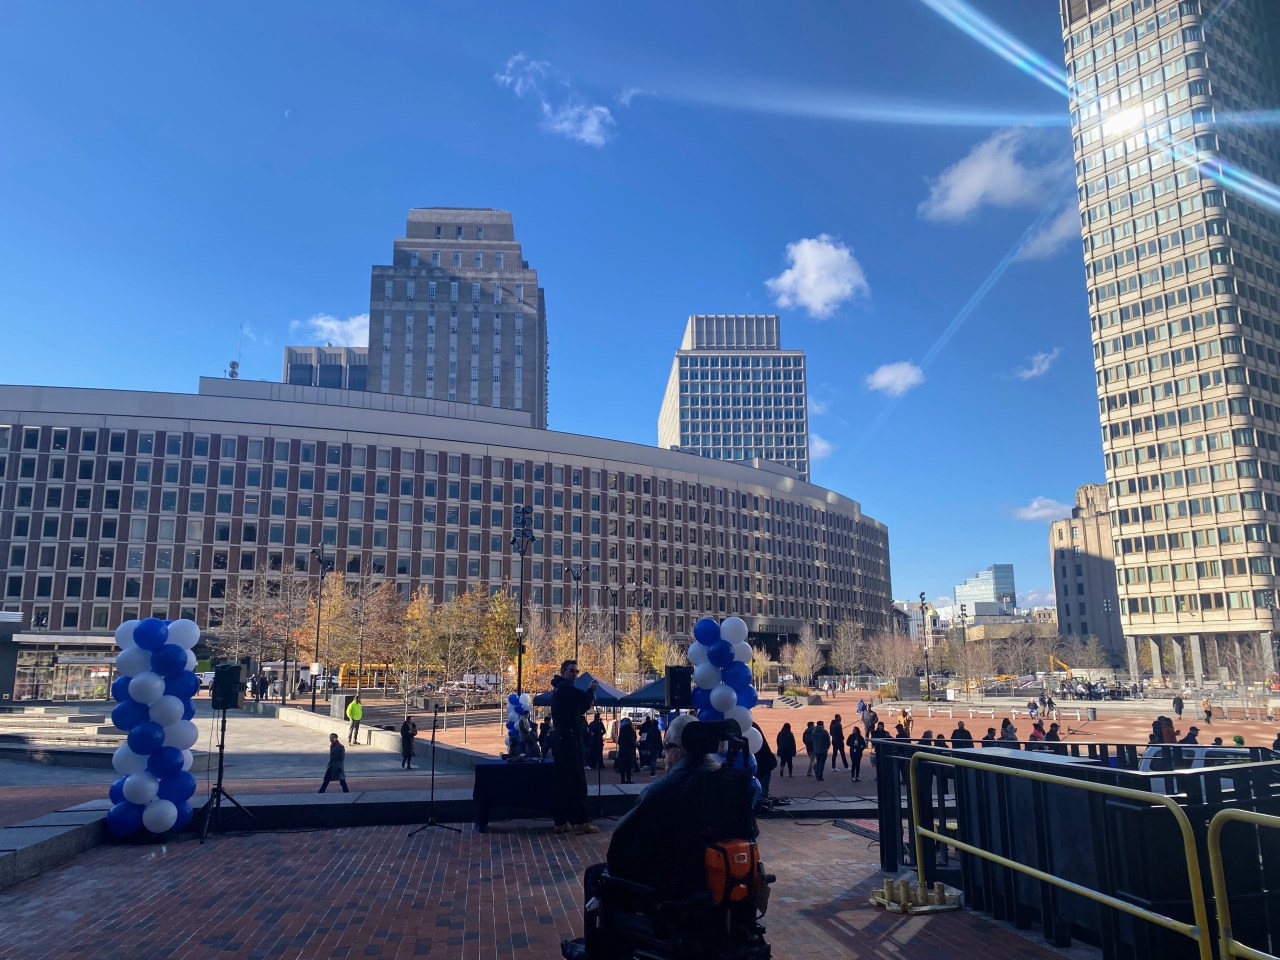 A person using a wheelchair overlooks the newly opened Boston City Hall Plaza under a bright blue winter sky.